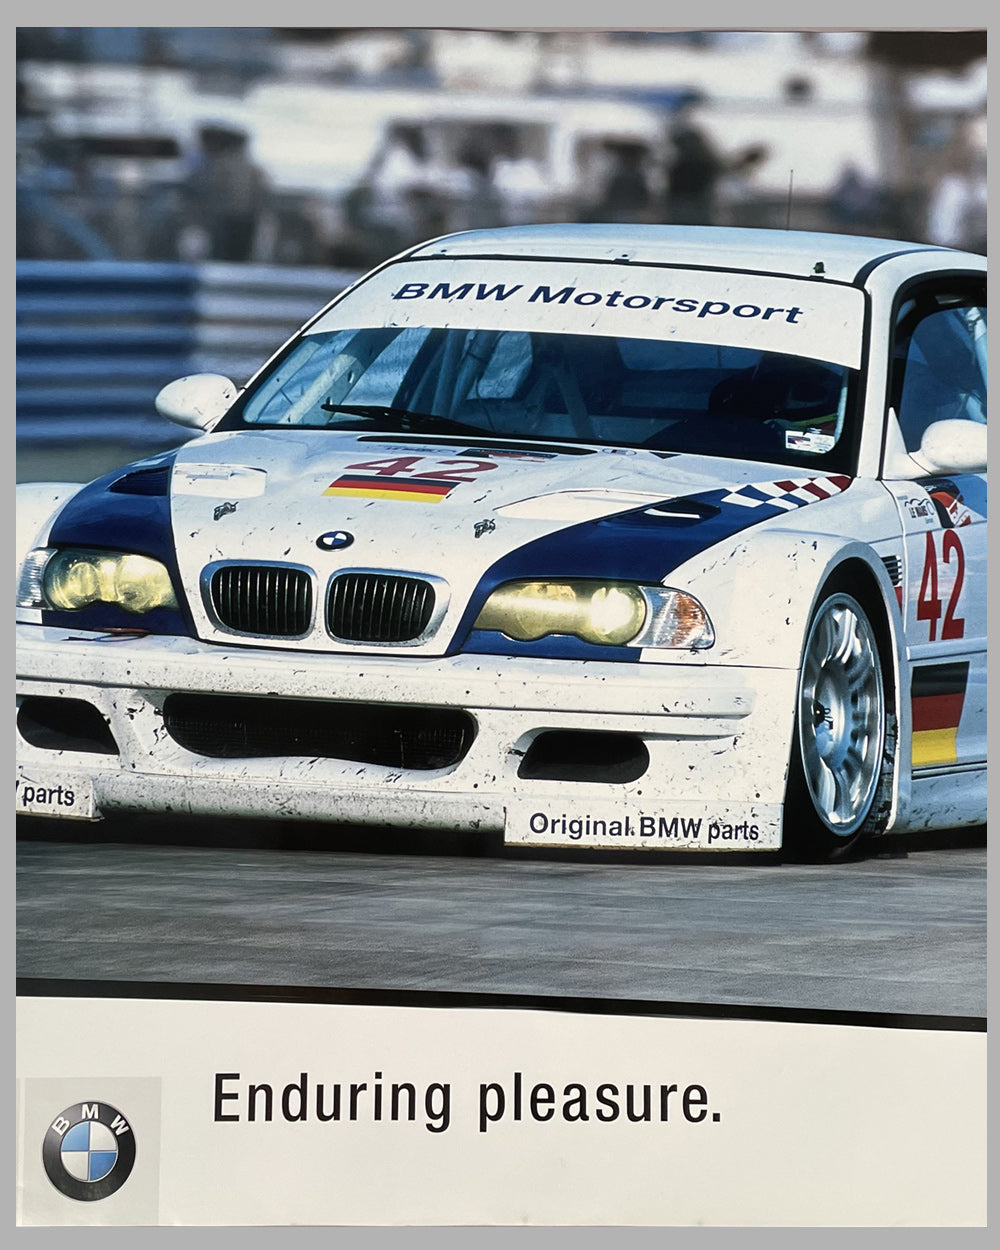 BMW Motorsport original factory poster for the ALMS series